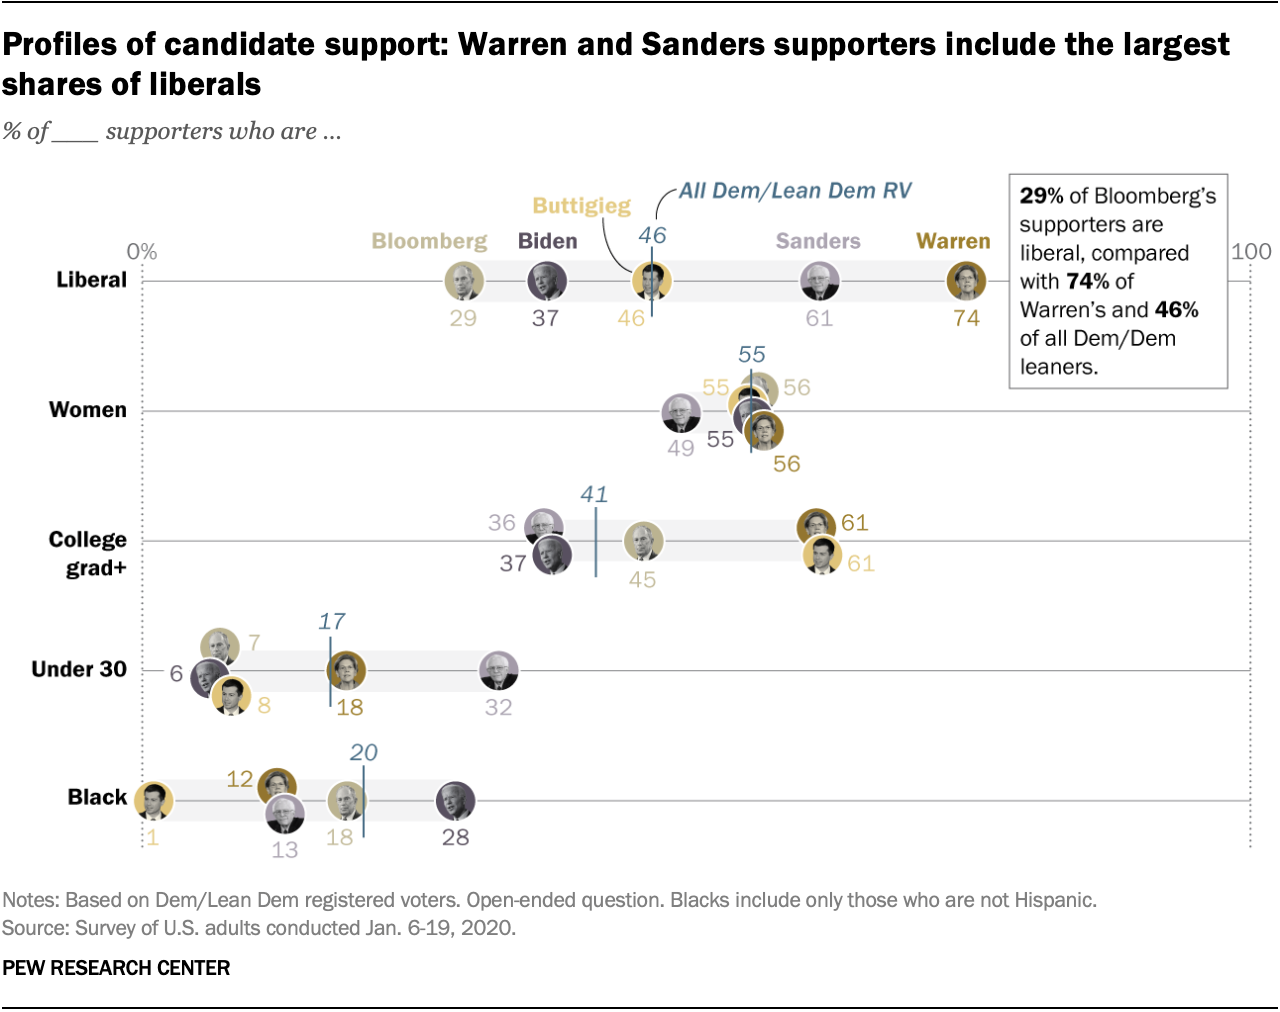 Profiles of candidate support: Warren and Sanders supporters include the largest shares of liberals